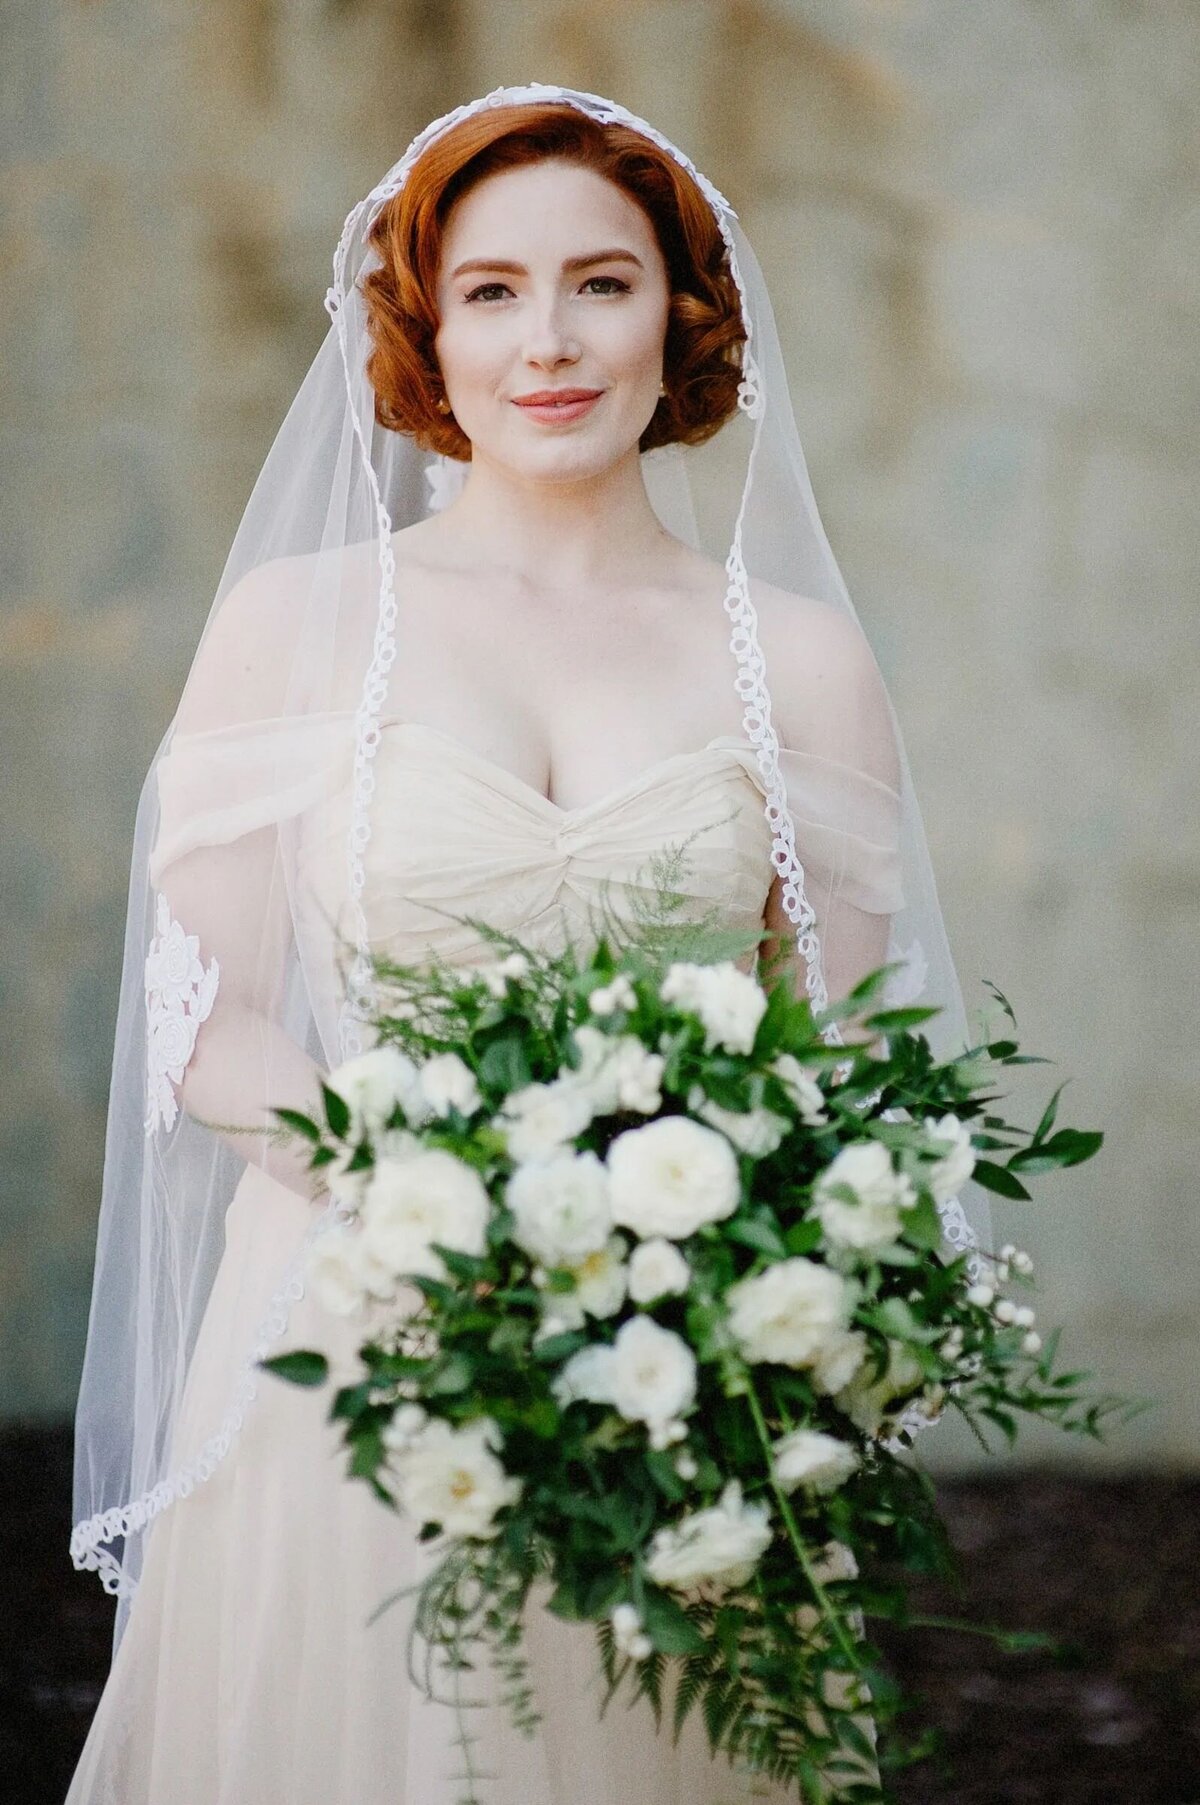 A bride holding a large bouquet of flowers.